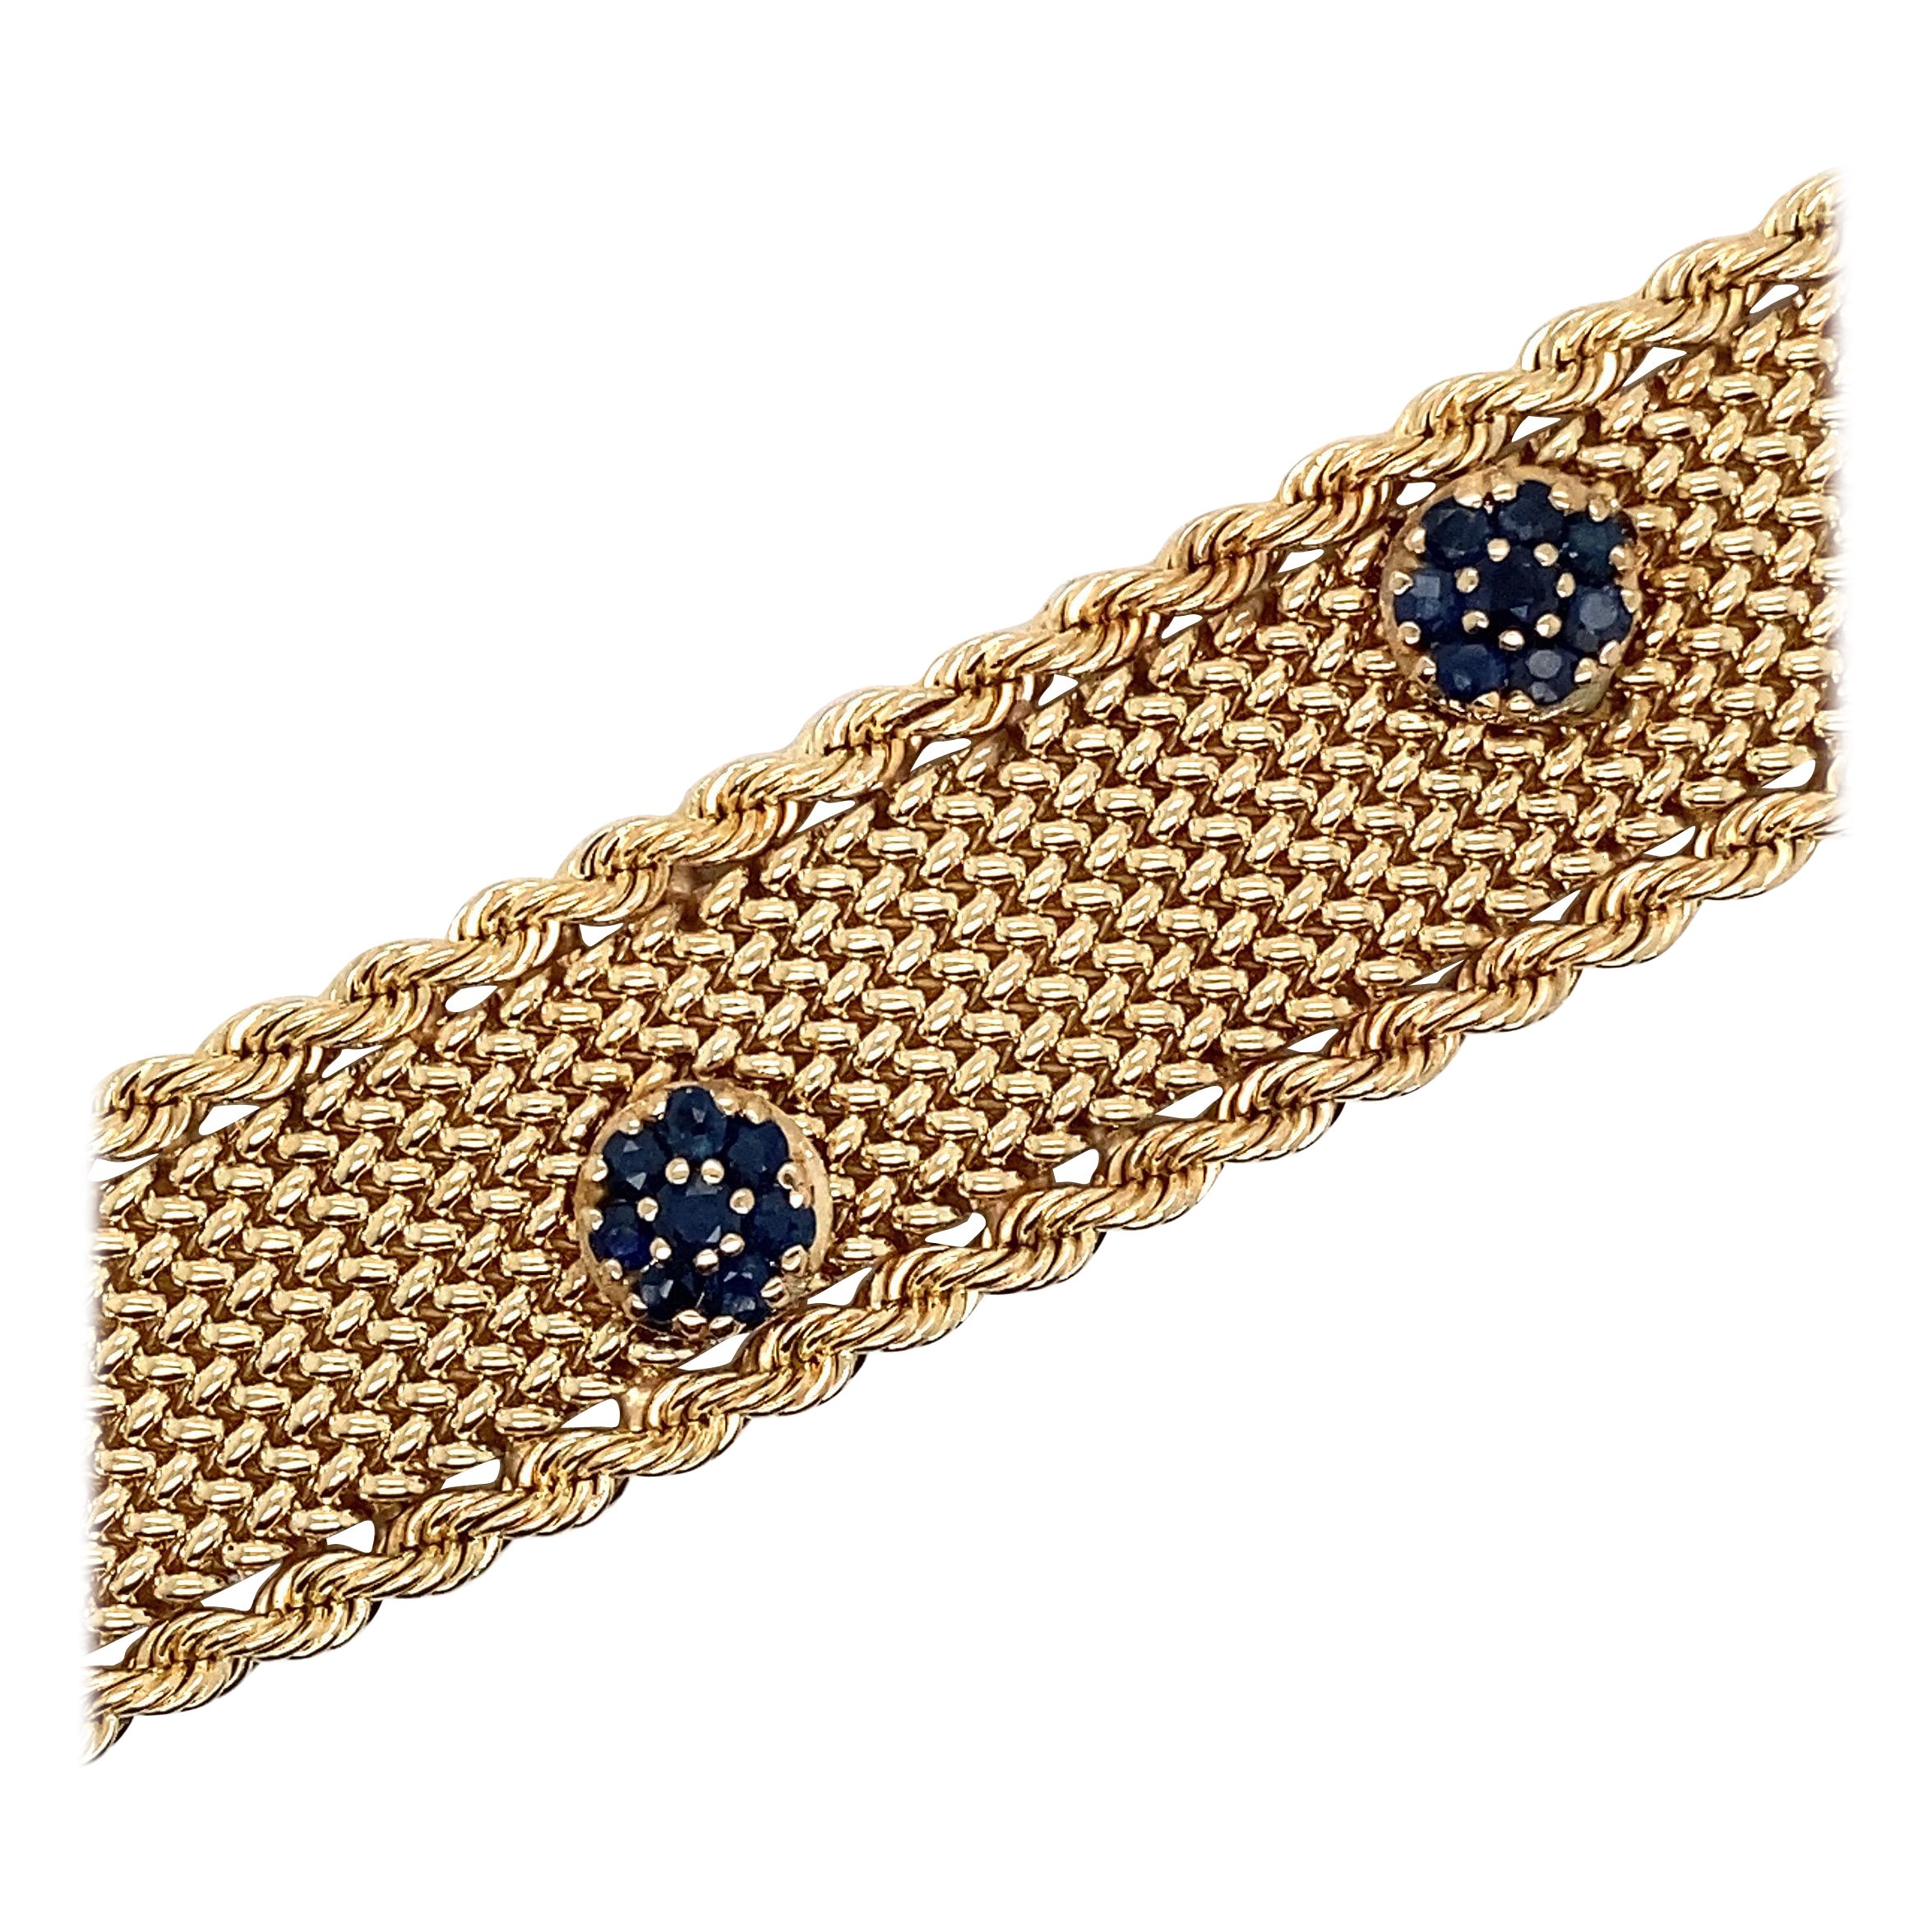 Vintage 14k Yellow Gold Mesh Bracelet with Sapphire Cluster Flowers